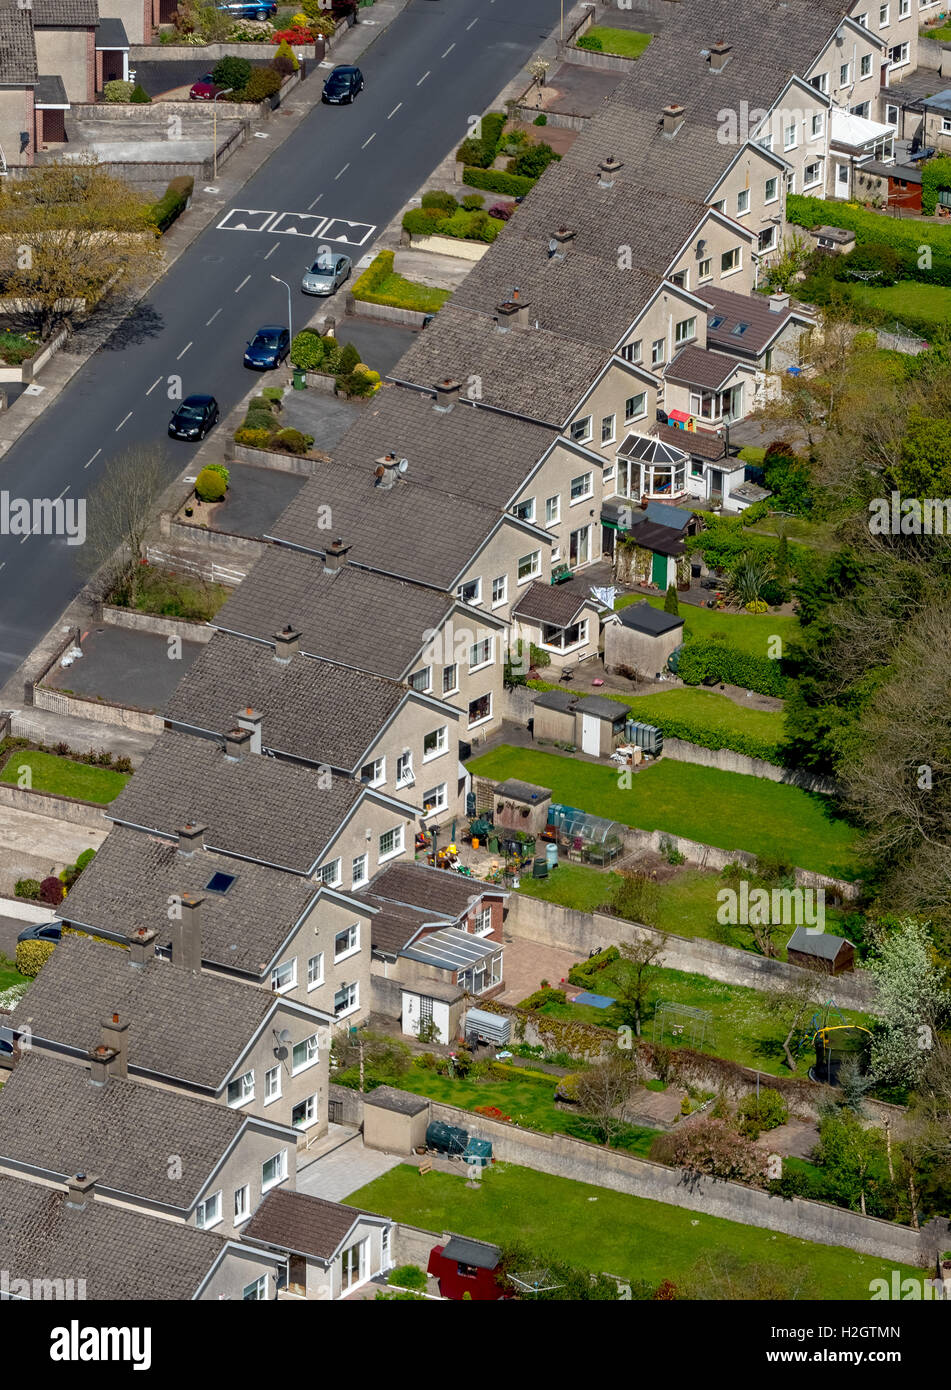 Residential area with terrace houses, Terrace Housing Limerick, County Clare, Ireland Stock Photo